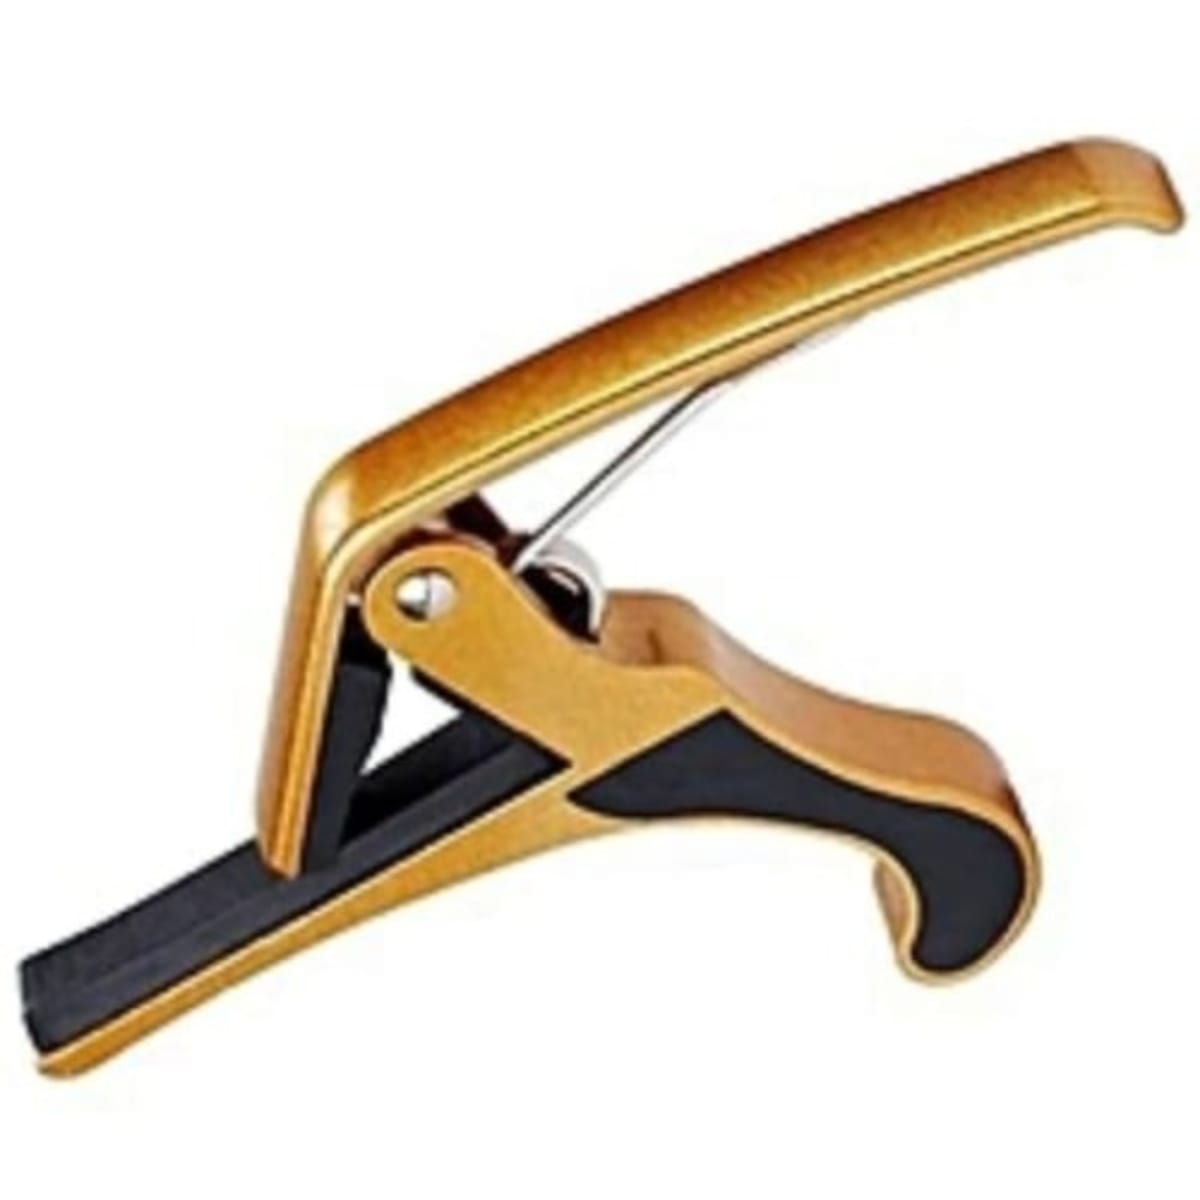 Trigger Guitar Capo with Spring Action Clamp